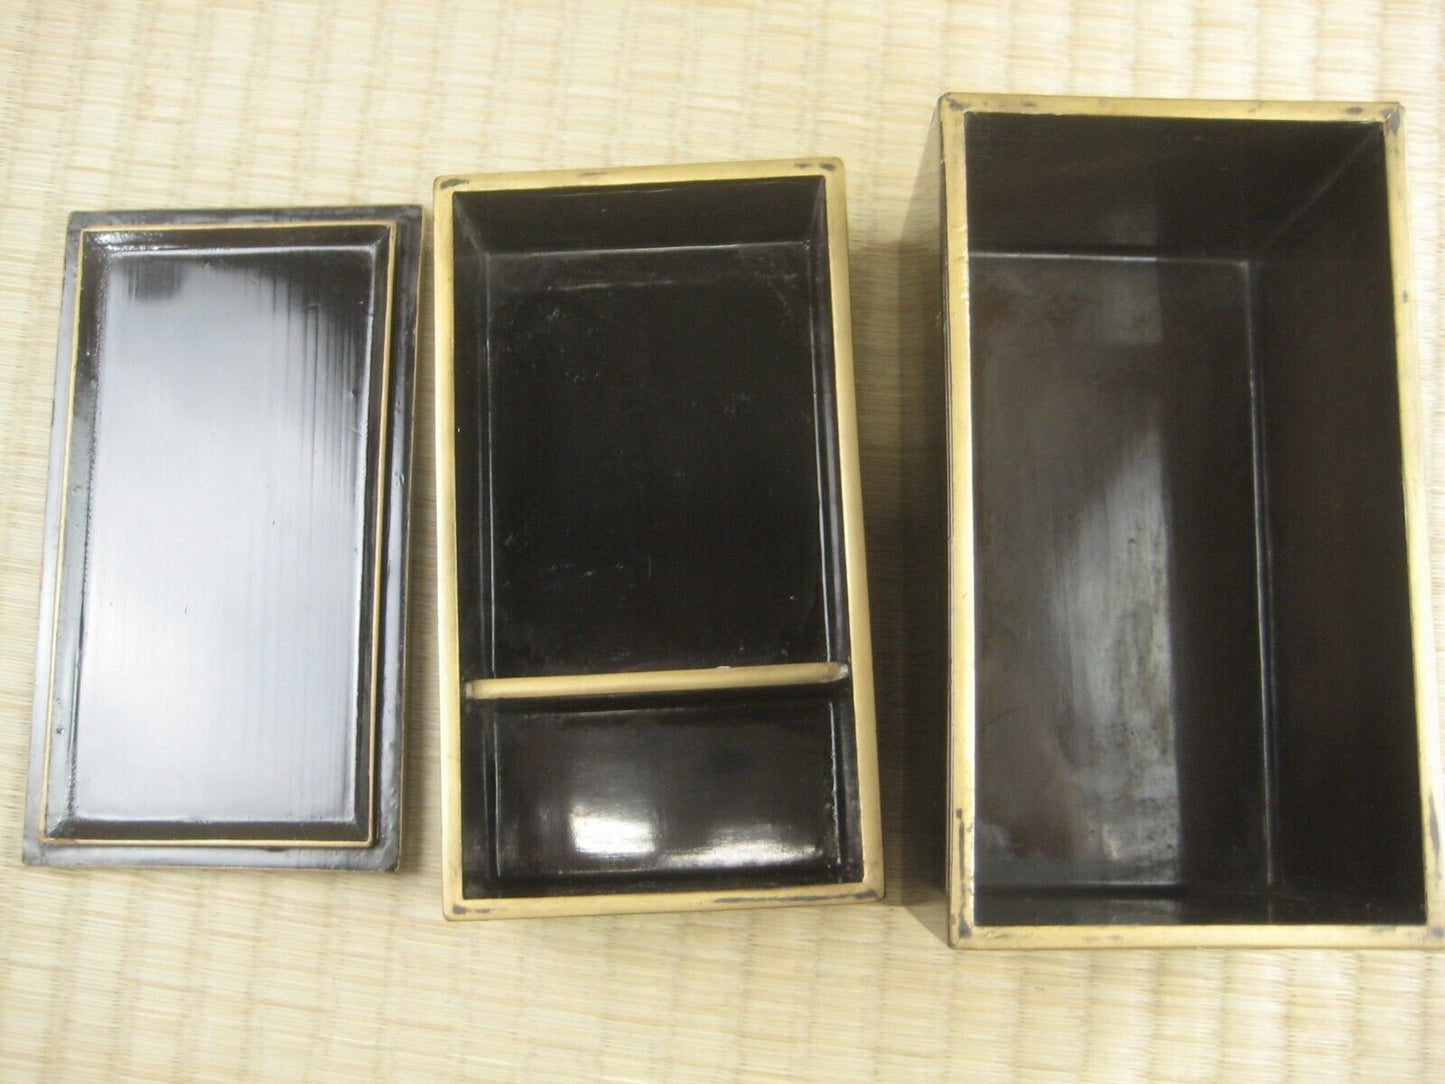 Antique Japanese 3 Compartment Box For Bento Or Storage Black Lacquer Gold Trim